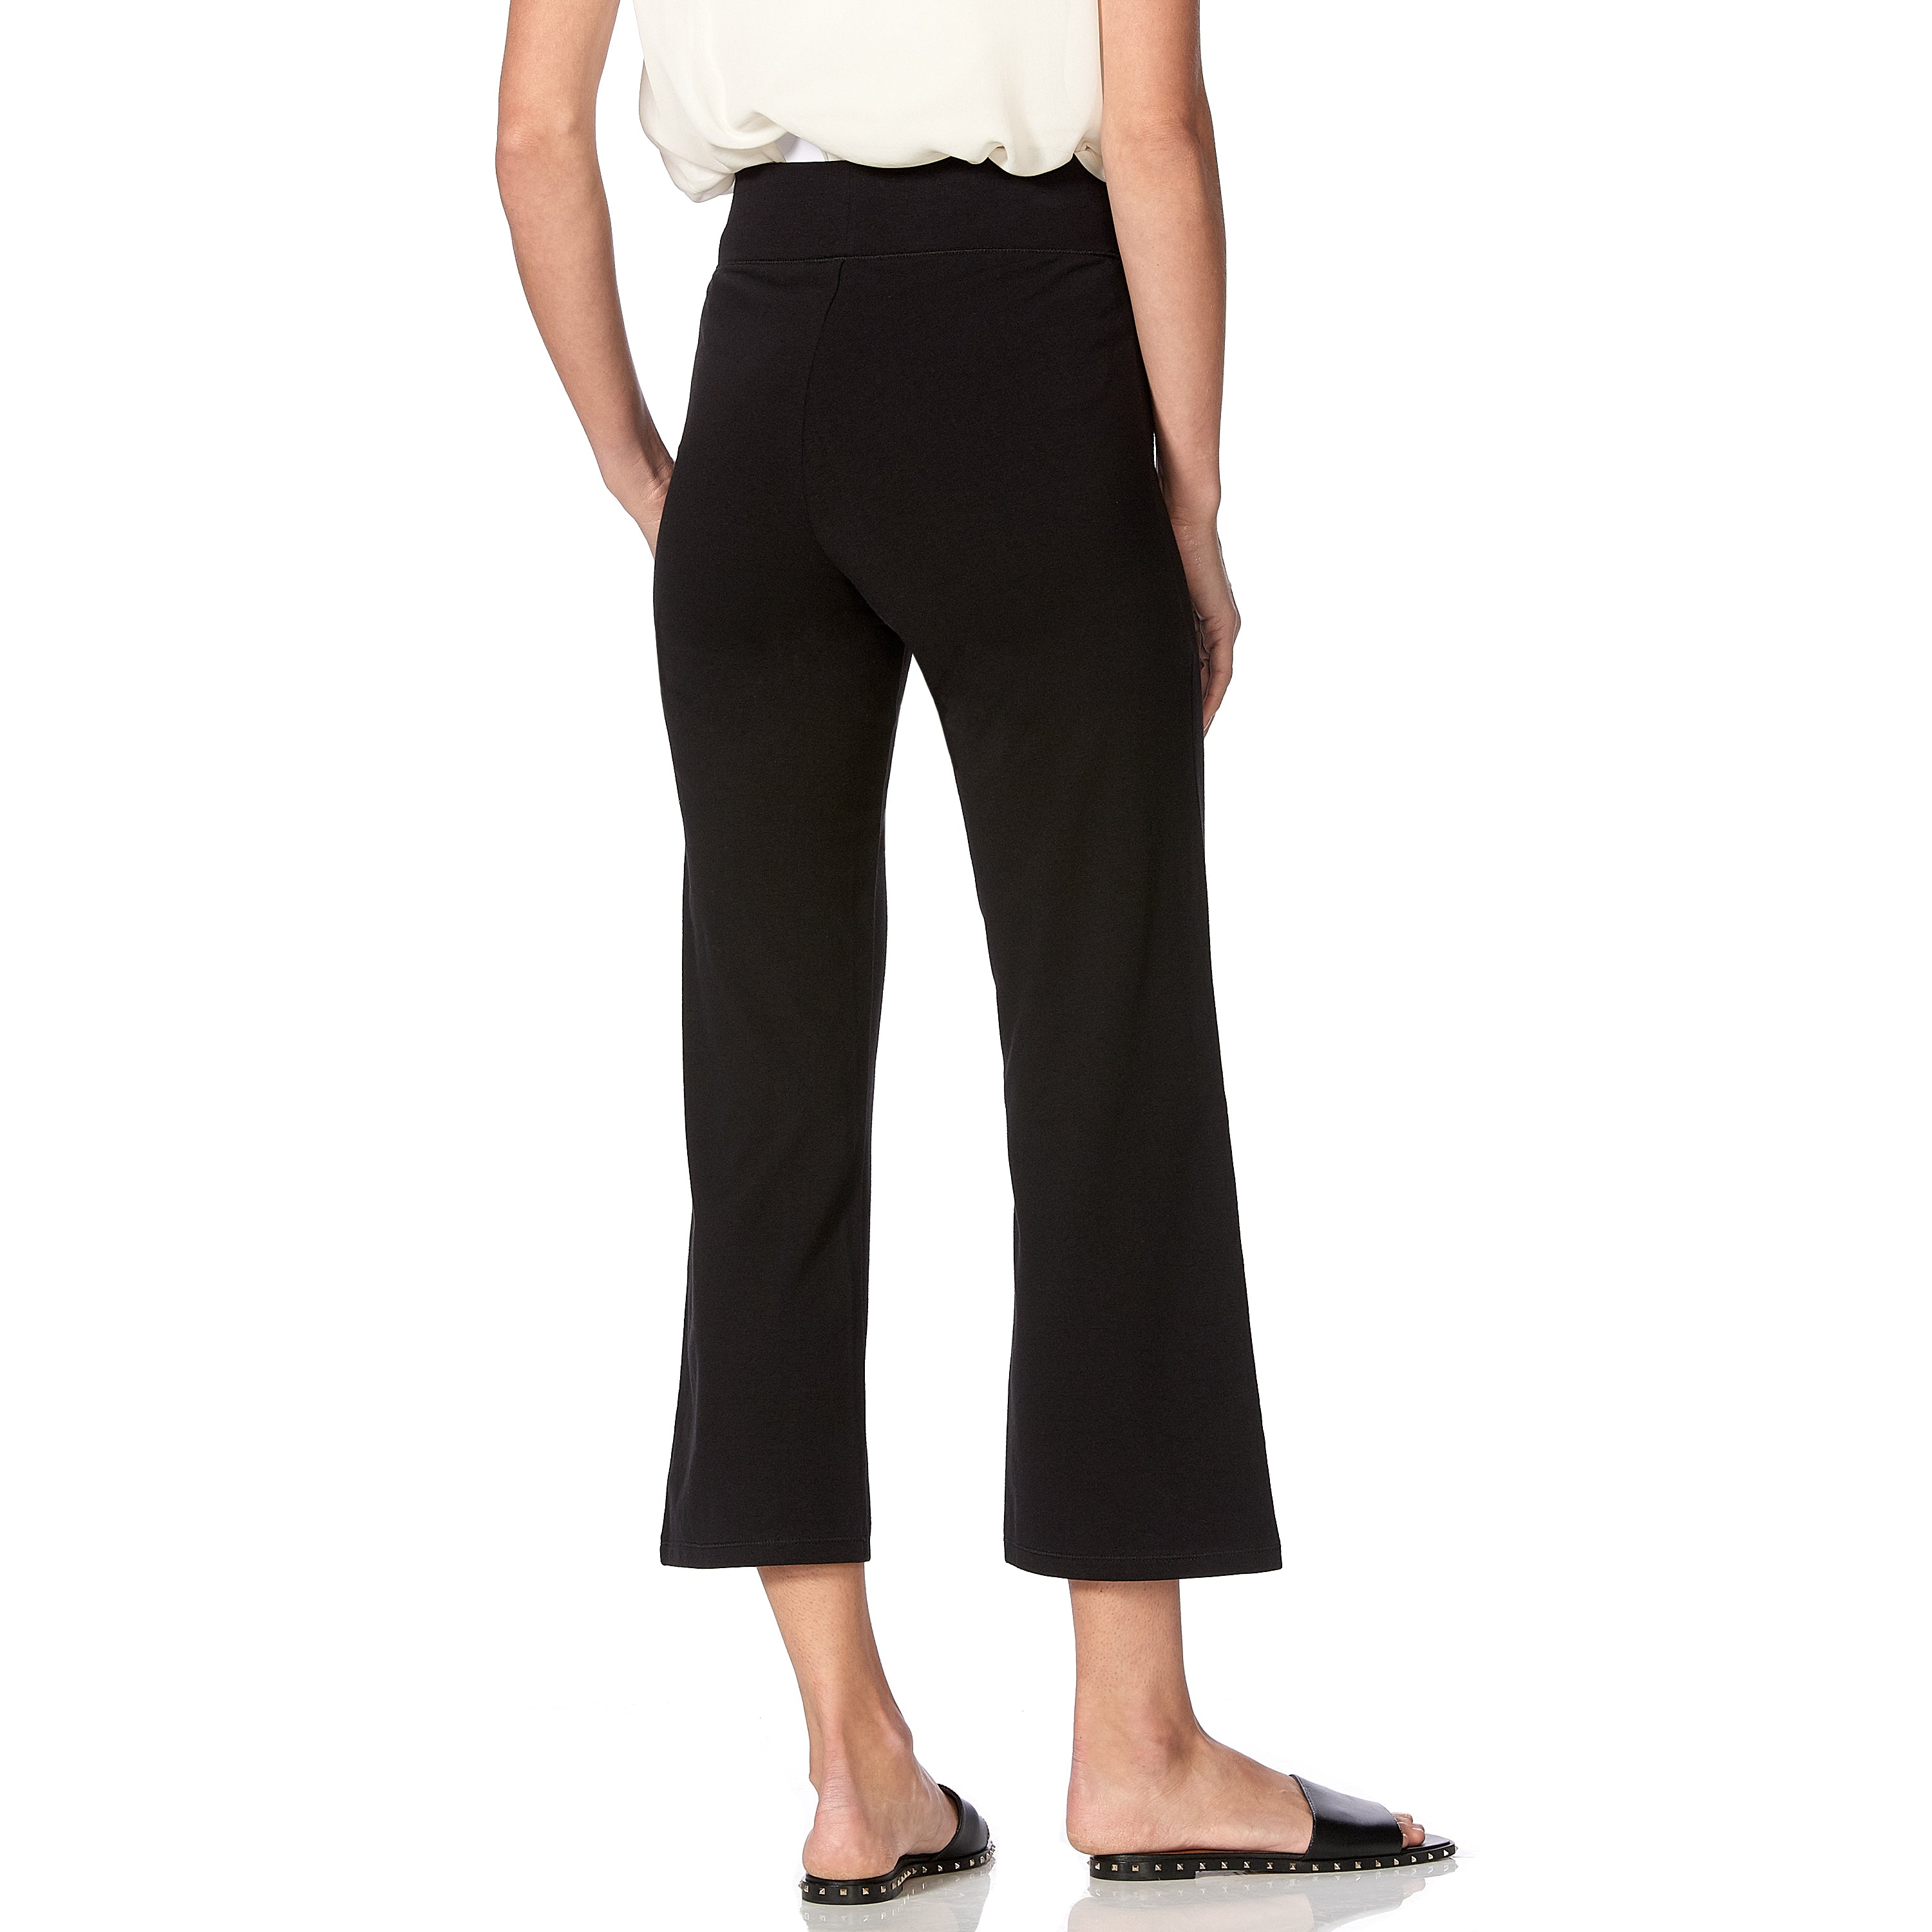 Holiday Clearance! Women's Pants, Flare Leggings for Women